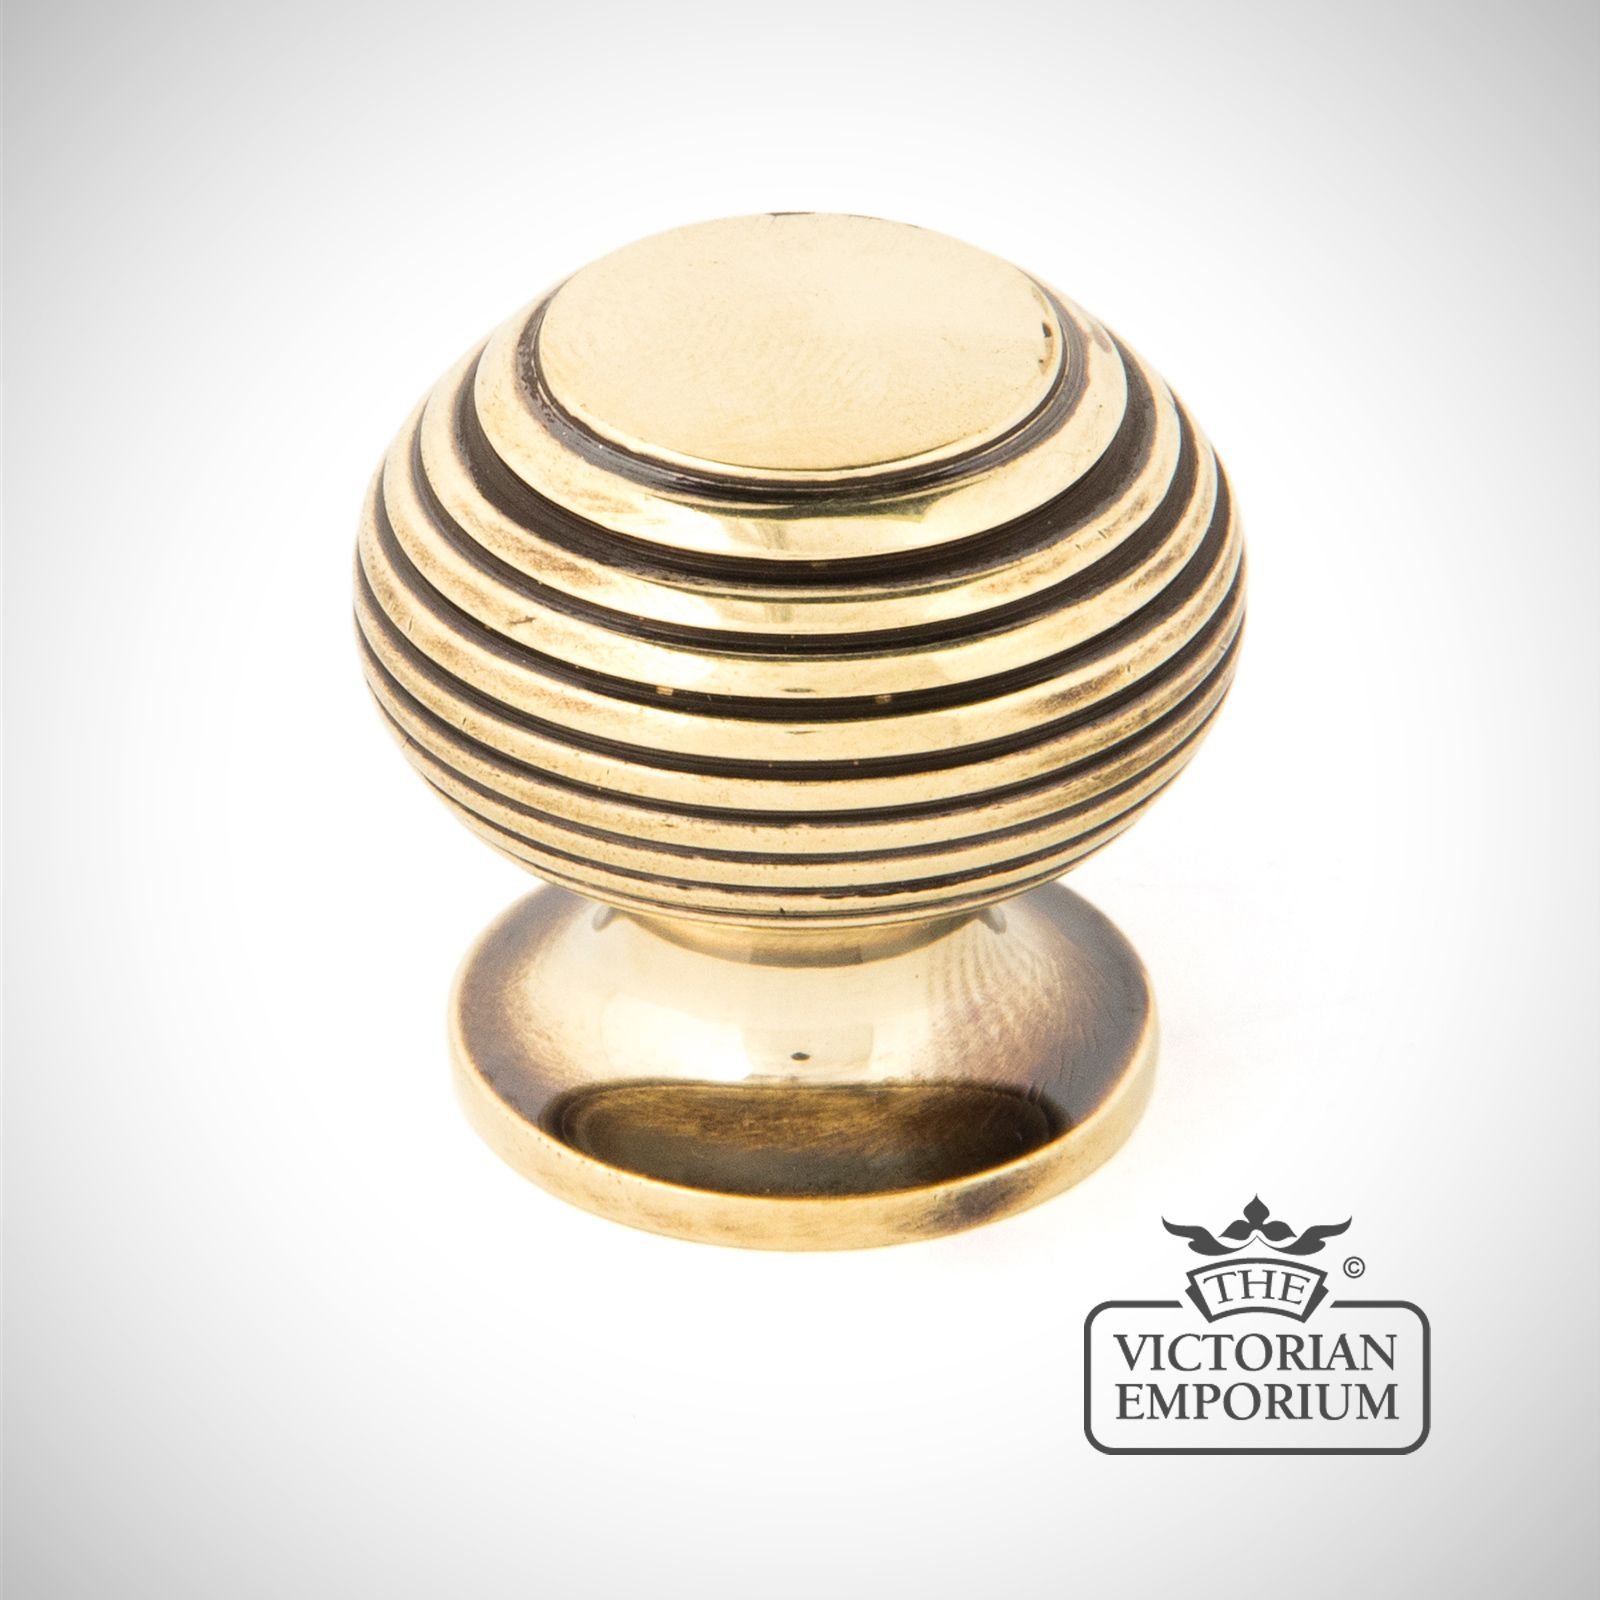 Antique Brass Beehive Cabinet Knob in a choice of two sizes